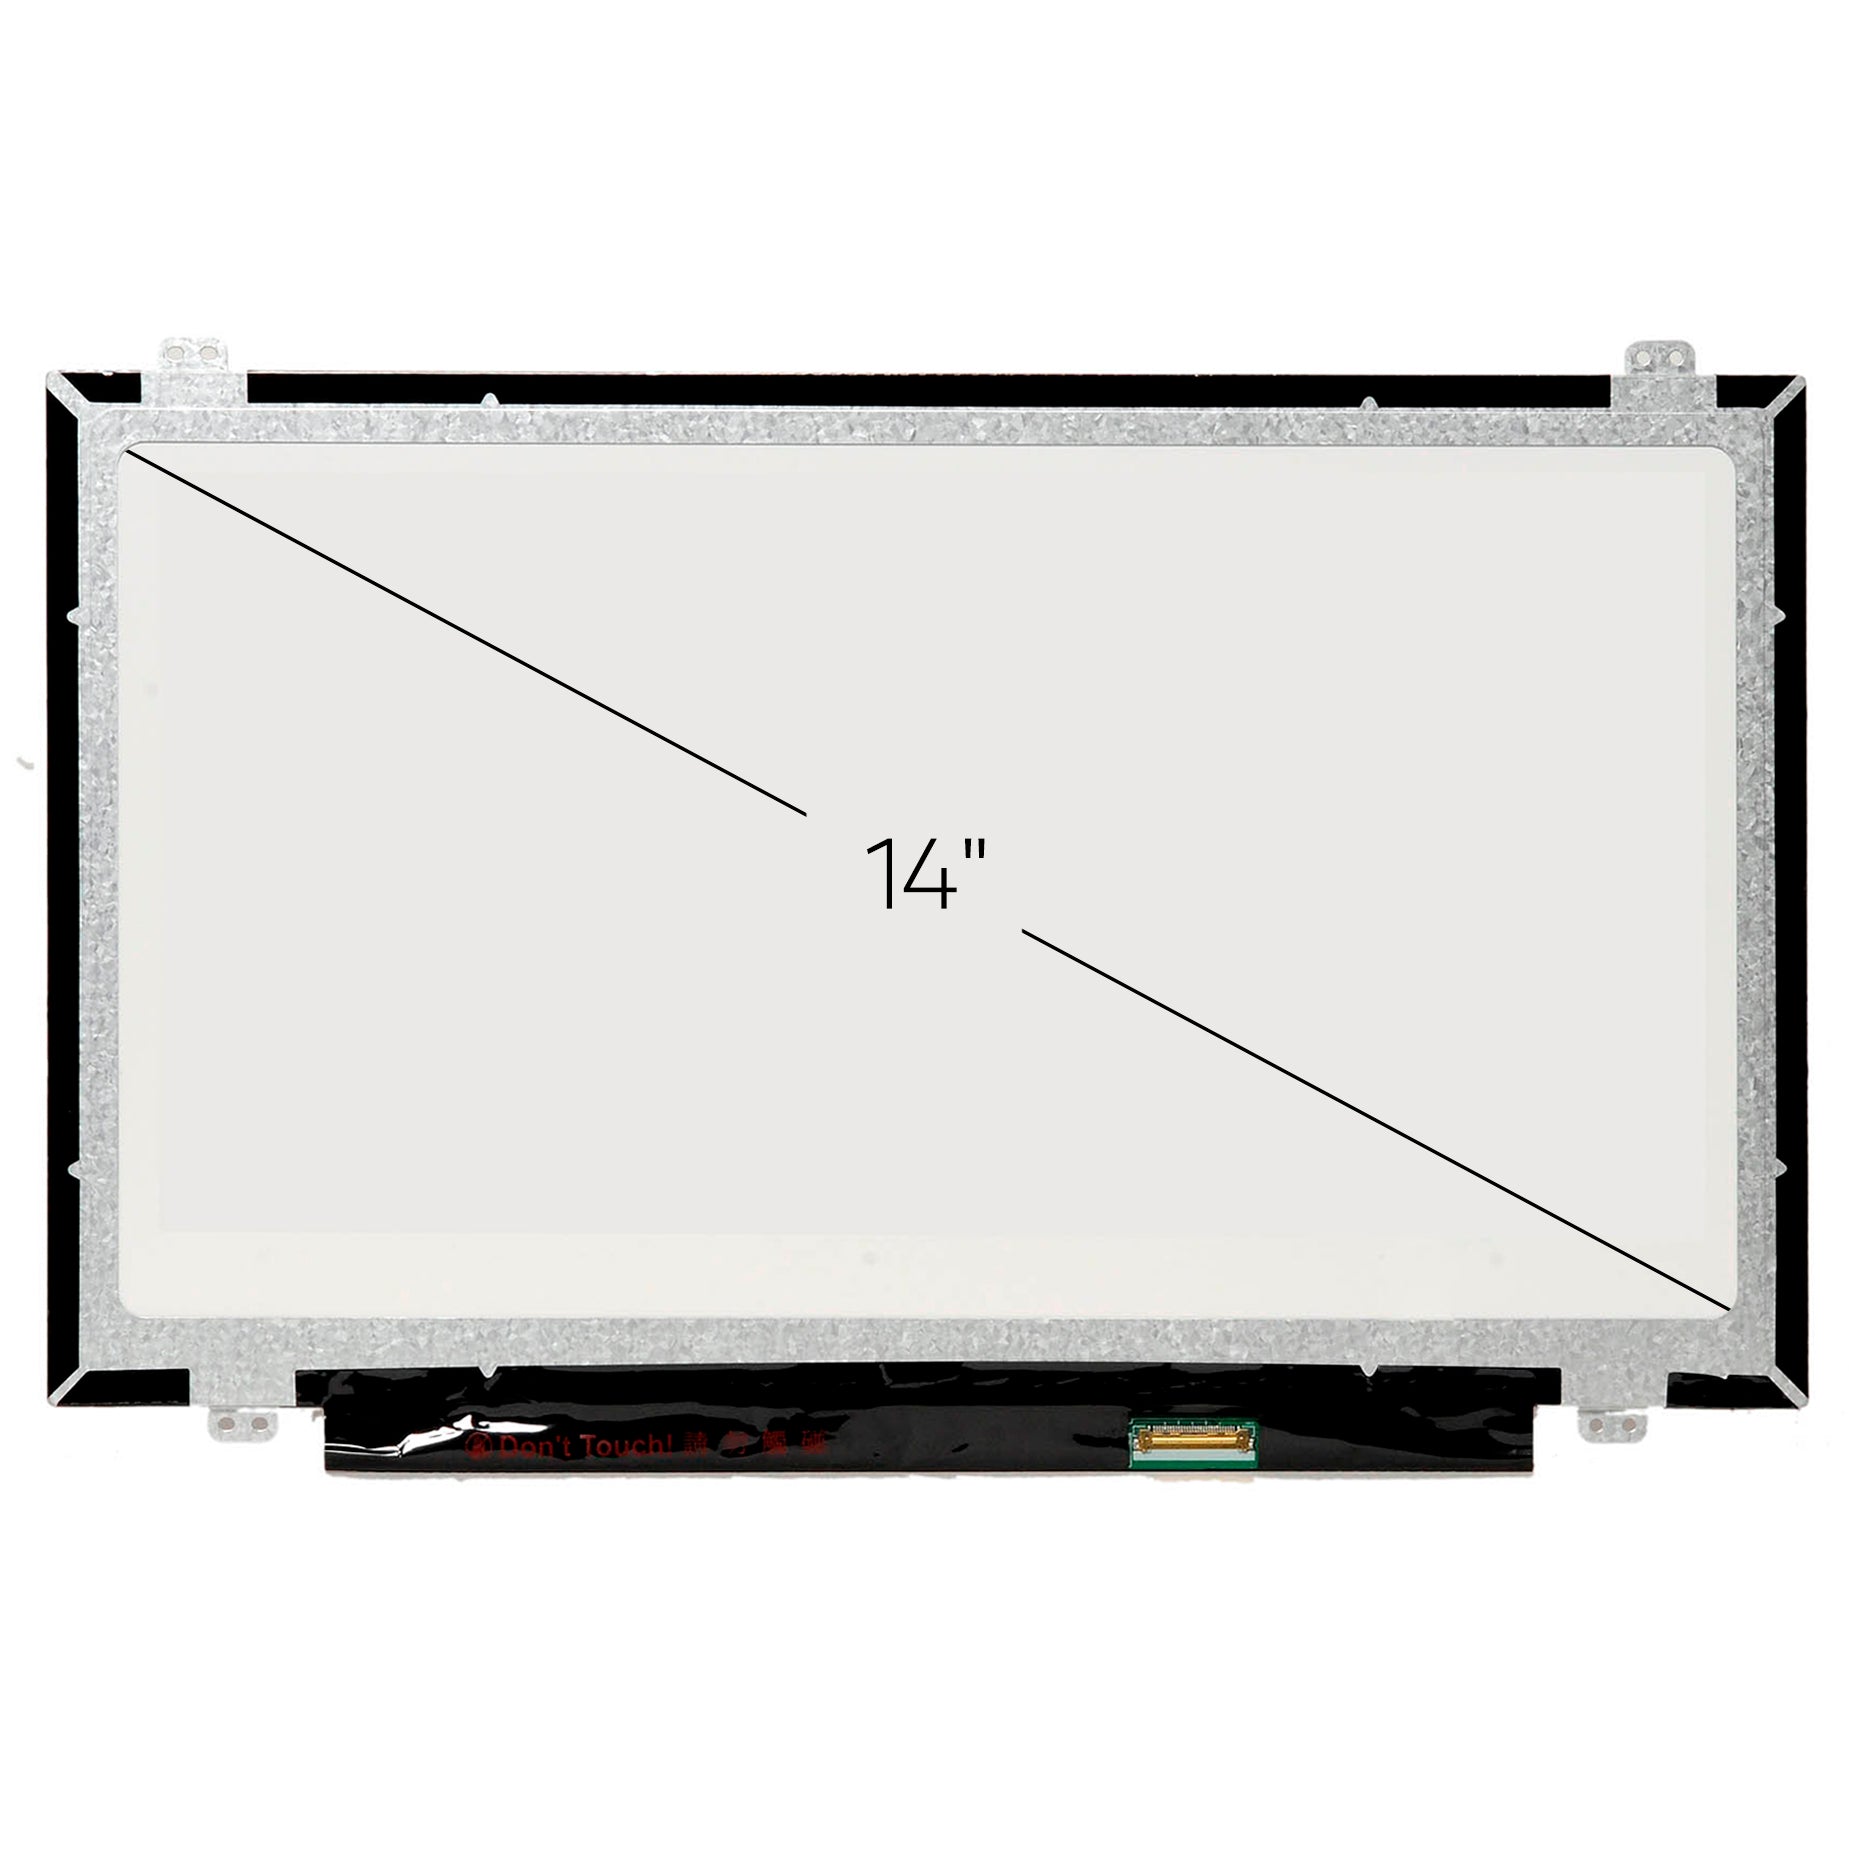 Screen Replacement for Dell P/N 0C8WJ DP/N 0C8WJ HD 1366x768 Glossy LCD LED Display